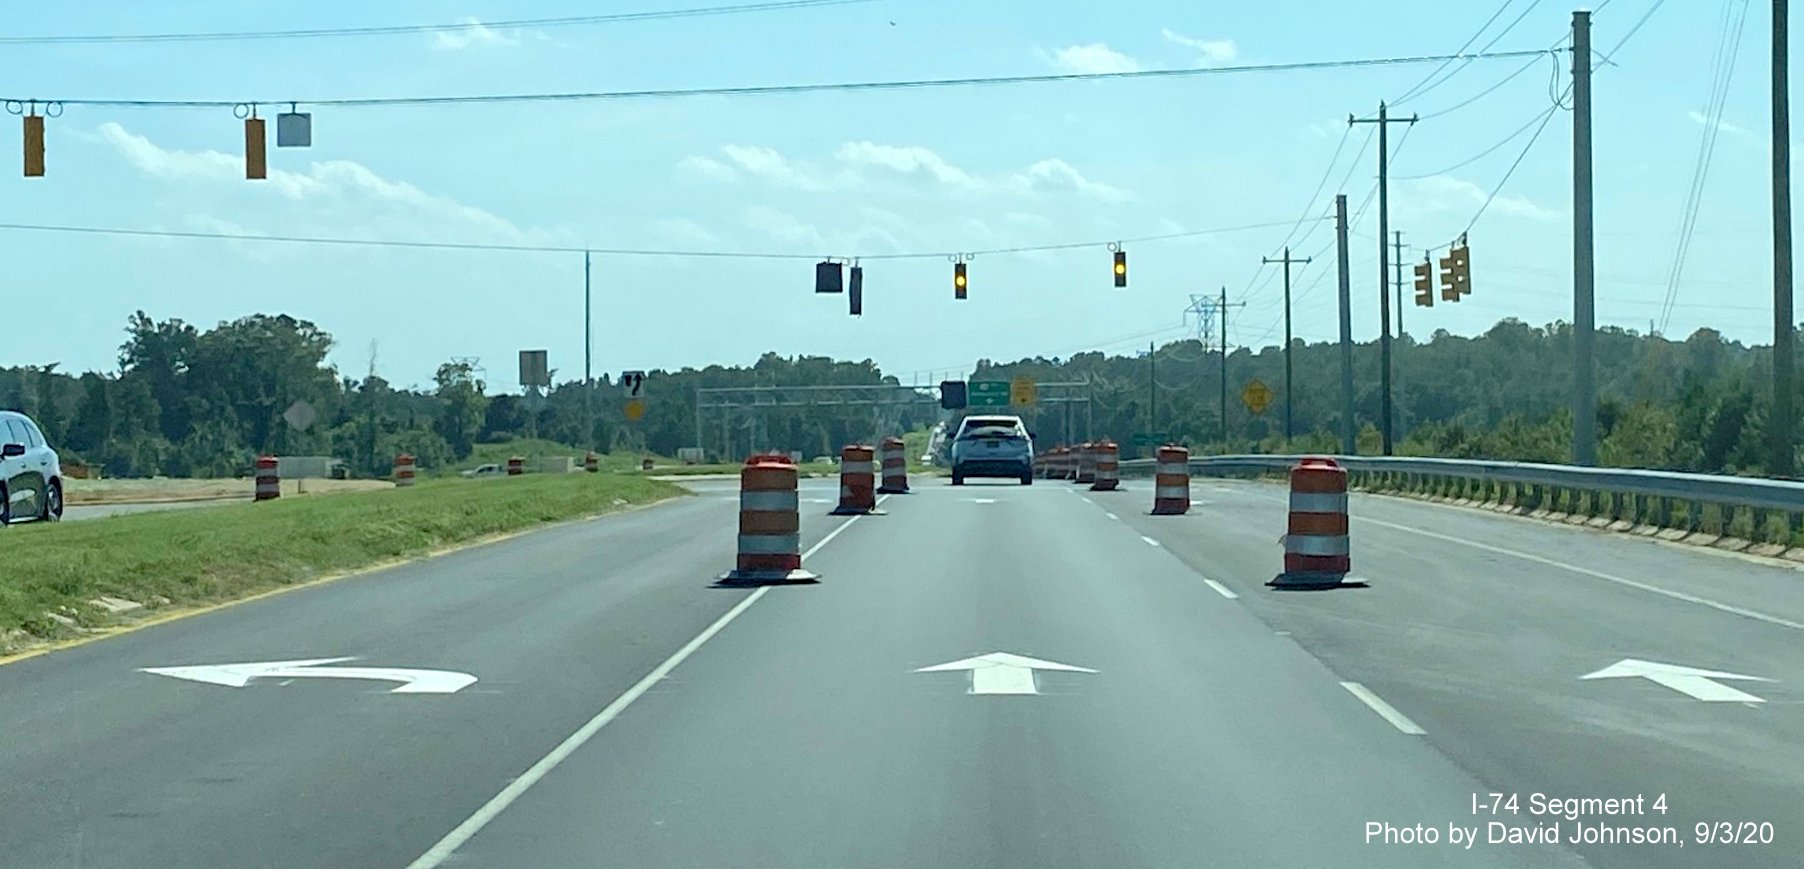 Image of newly installed traffic signals along US 158 at soon to open interchange with NC 74 Winston
        Salem Northern Beltway, by David Johnson September 2020